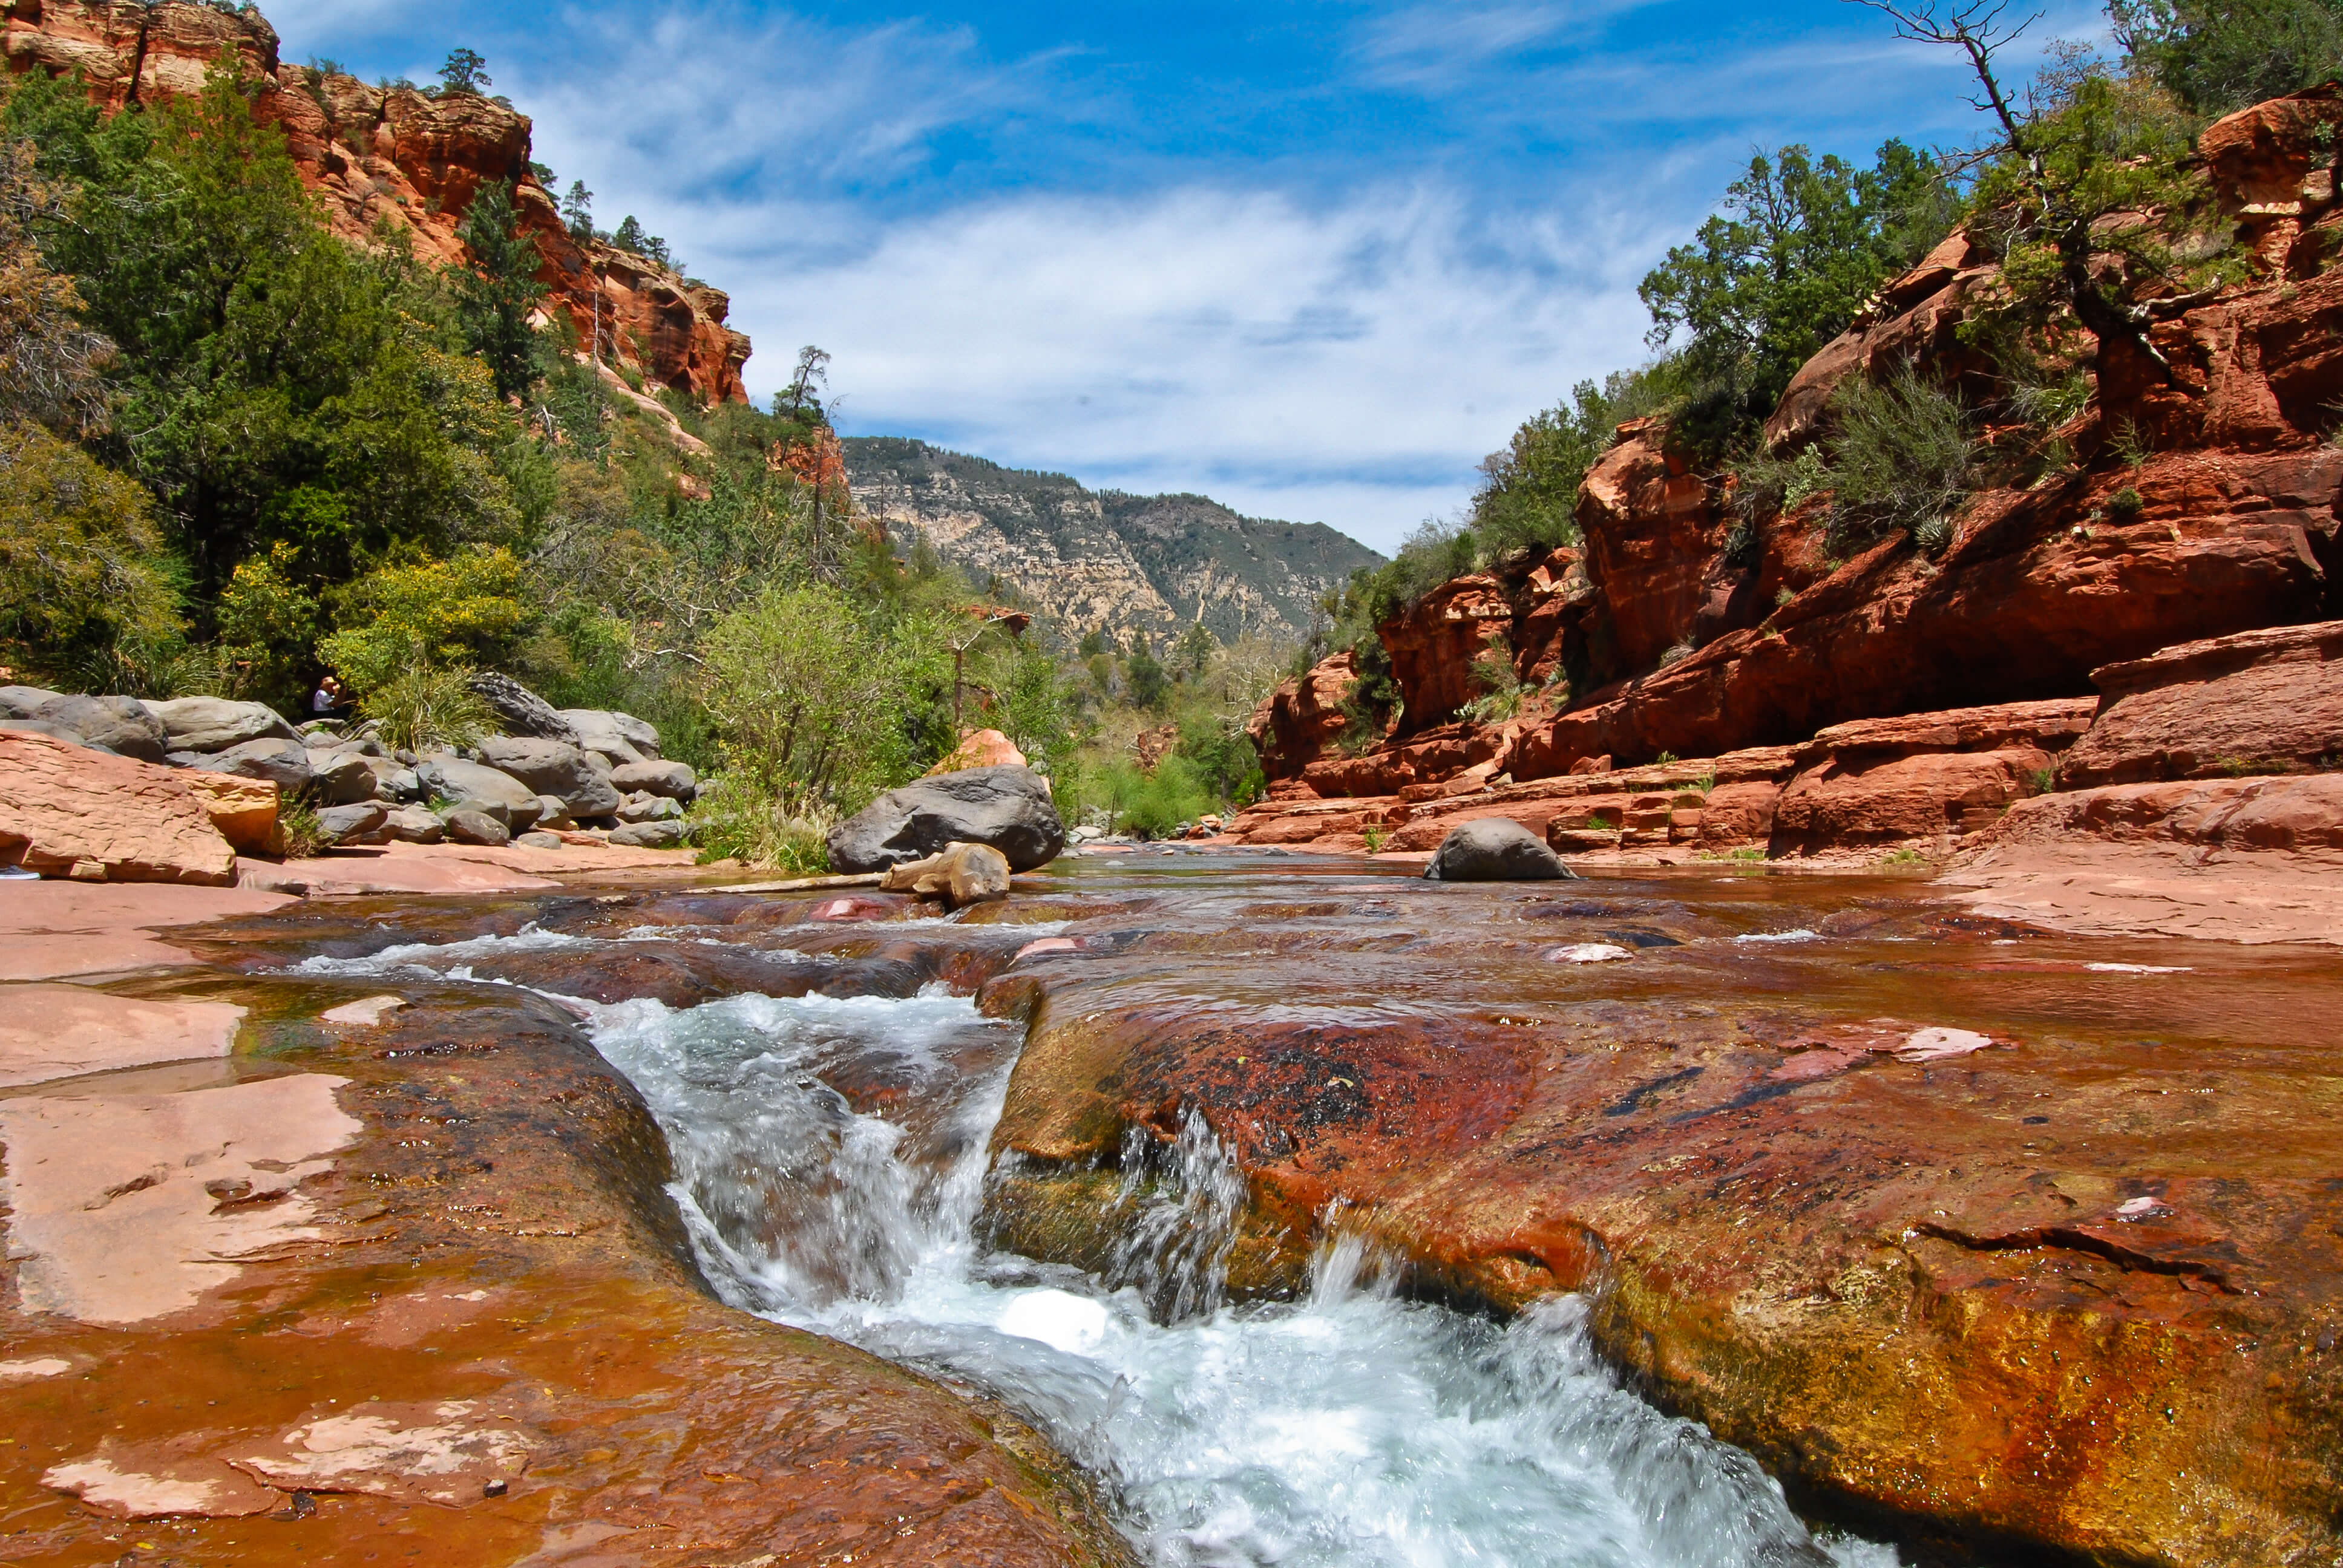 1) Slide Rock State Park is 7 Miles North of Sedona.